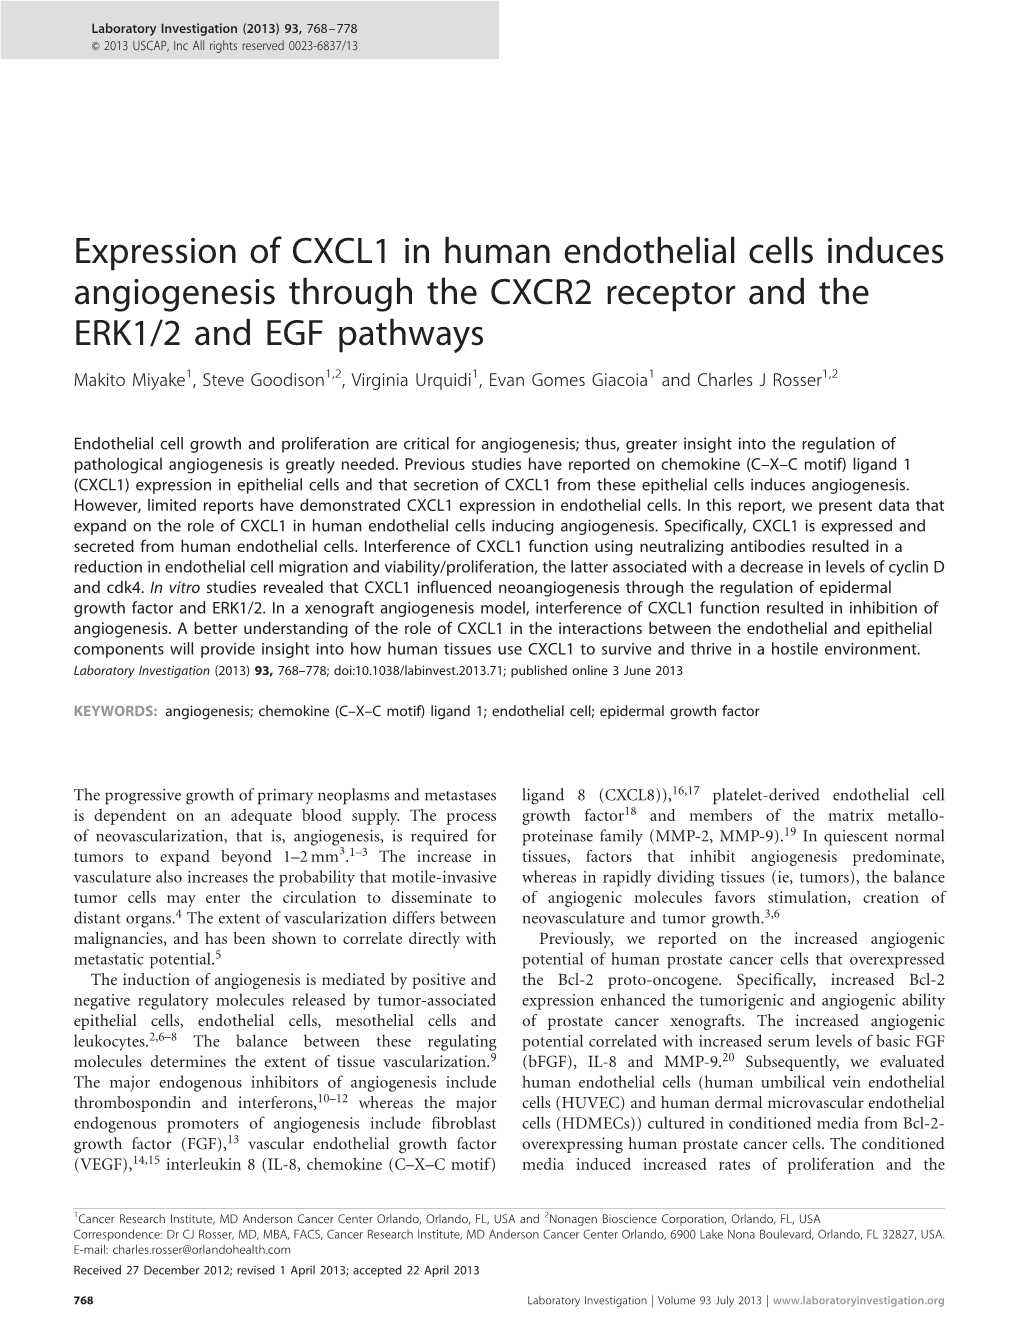 Expression of CXCL1 in Human Endothelial Cells Induces